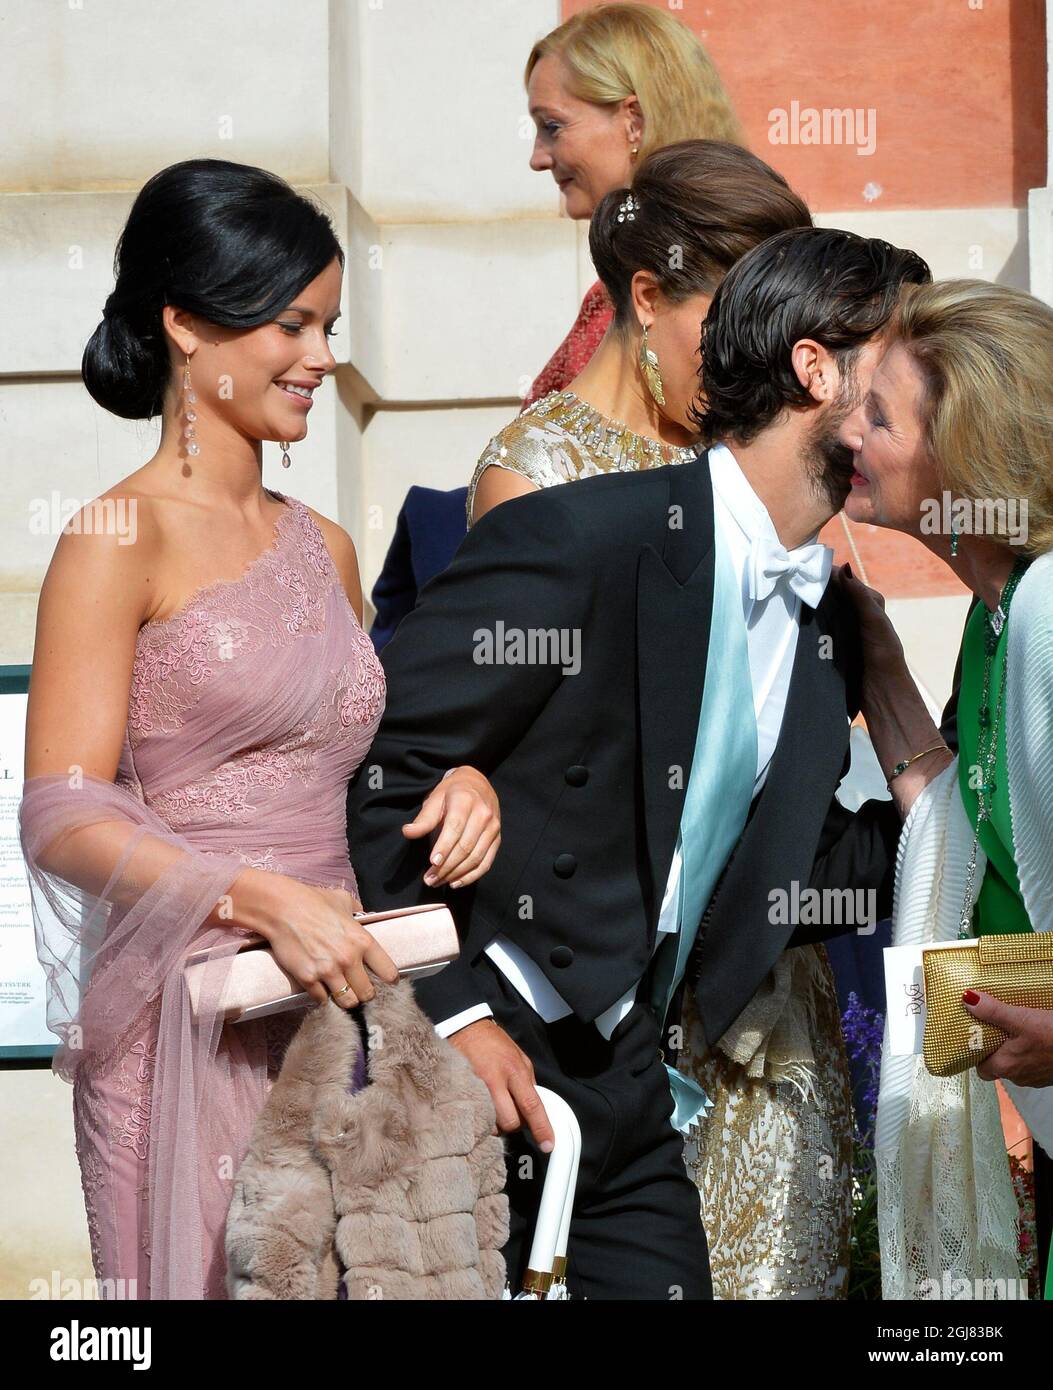 STOCKHOLM 2013-08-31 Sofia Hellqvist, Prince Carl Philip and Queen Sonja after the wedding at the Ulriksdal Palace Chapel in Stockholm, Sweden, August 31, 2013. The Swedish Kings godson Gustaf Magnuson (son of Princess Christina and Tord Magnuson) married model Vicky AndrÃ©n Saturday. Photo Jonas Ekstromer / SCANPIX / ** SWEDEN OUT ** Stock Photo